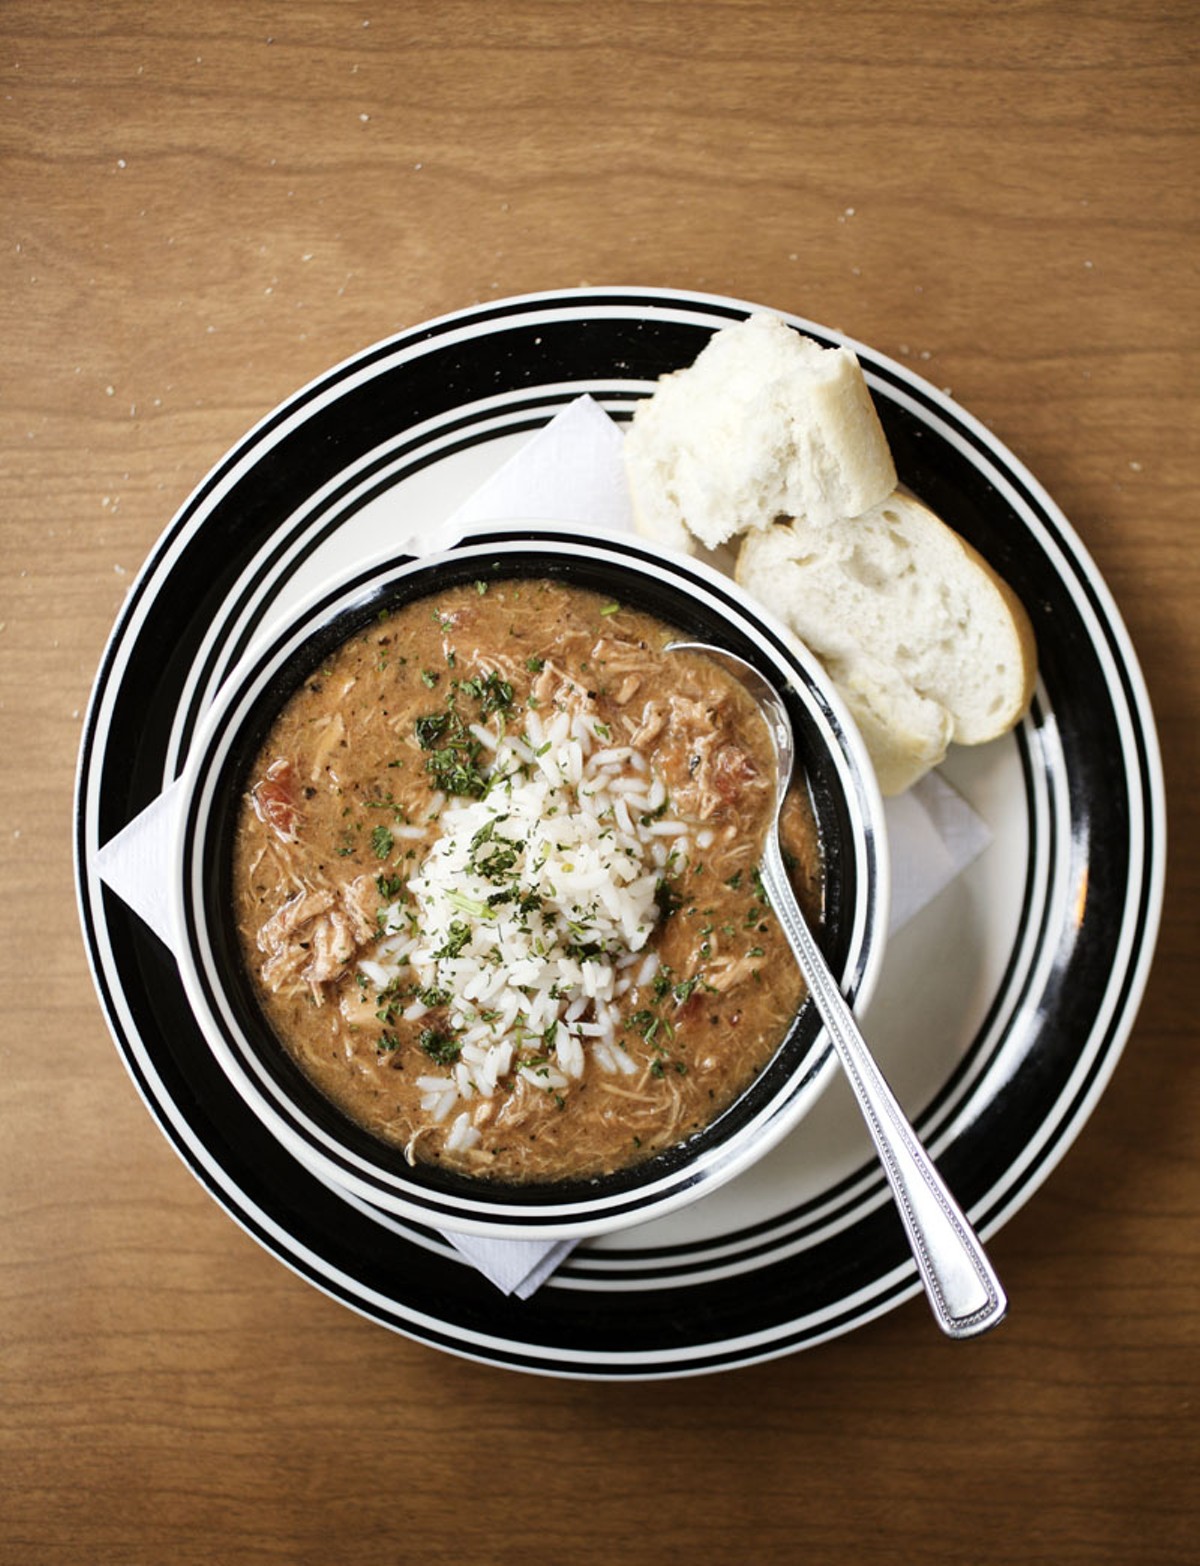 Riverbend's chicken and andouille gumbo.